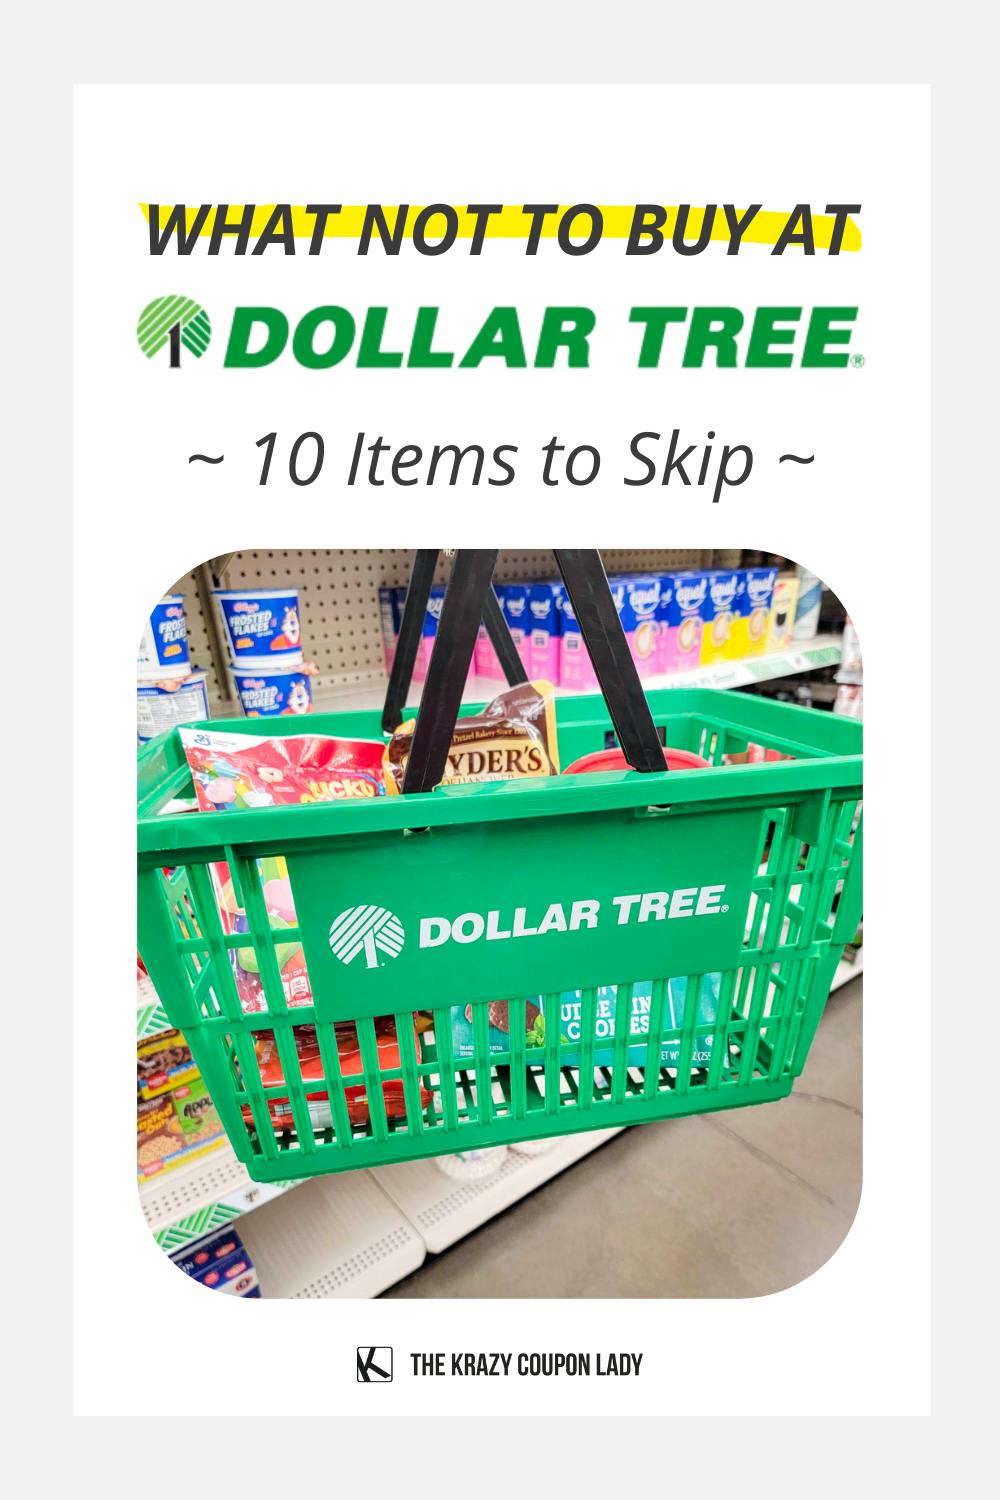 What Not to Buy at Dollar Tree: 10 Items to Skip